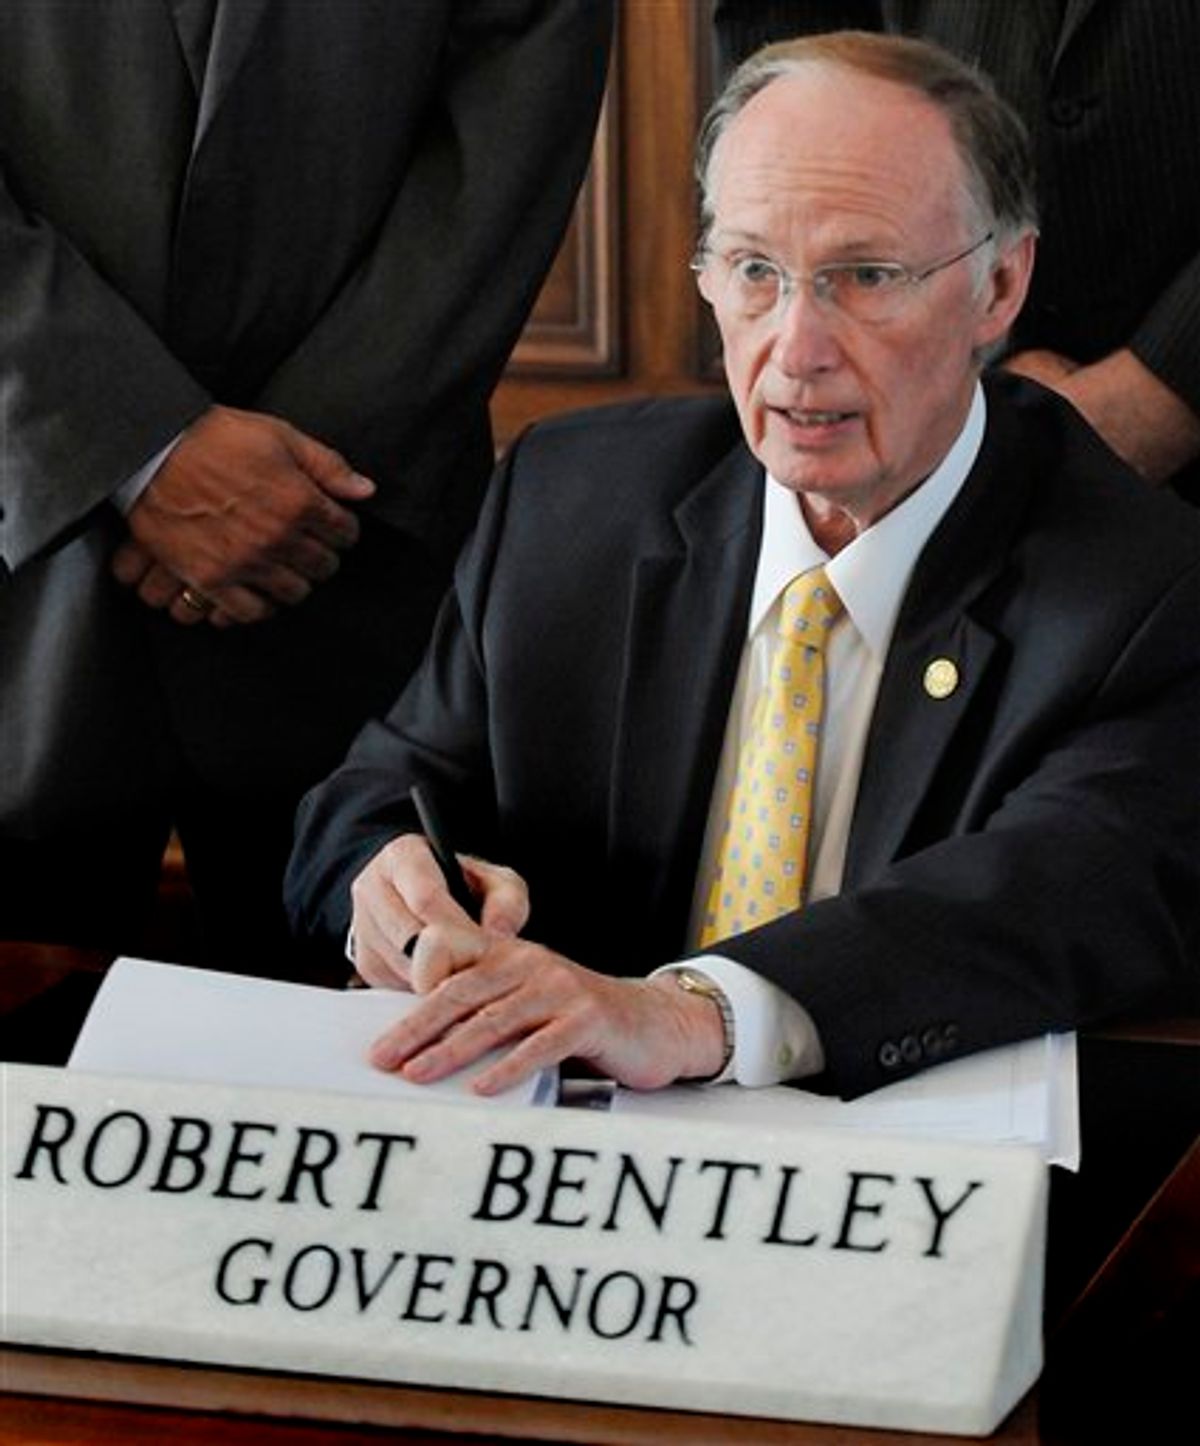 Alabama Gov. Robert Bentley signs into law, what critics and supporters are calling the strongest bill in the nation cracking down on illegal immigration, on Thursday, June 9, 2011 at the state Capitol in Montgomery, Ala. The bill  allows police to arrest anyone suspected of being an illegal immigrant if they're stopped for any other reason. It also requires public schools to determine students' immigration status and makes it a crime to knowingly give an illegal immigrant a ride. (AP Photo/Montgomery Advertiser, Mickey Welsh) (AP)